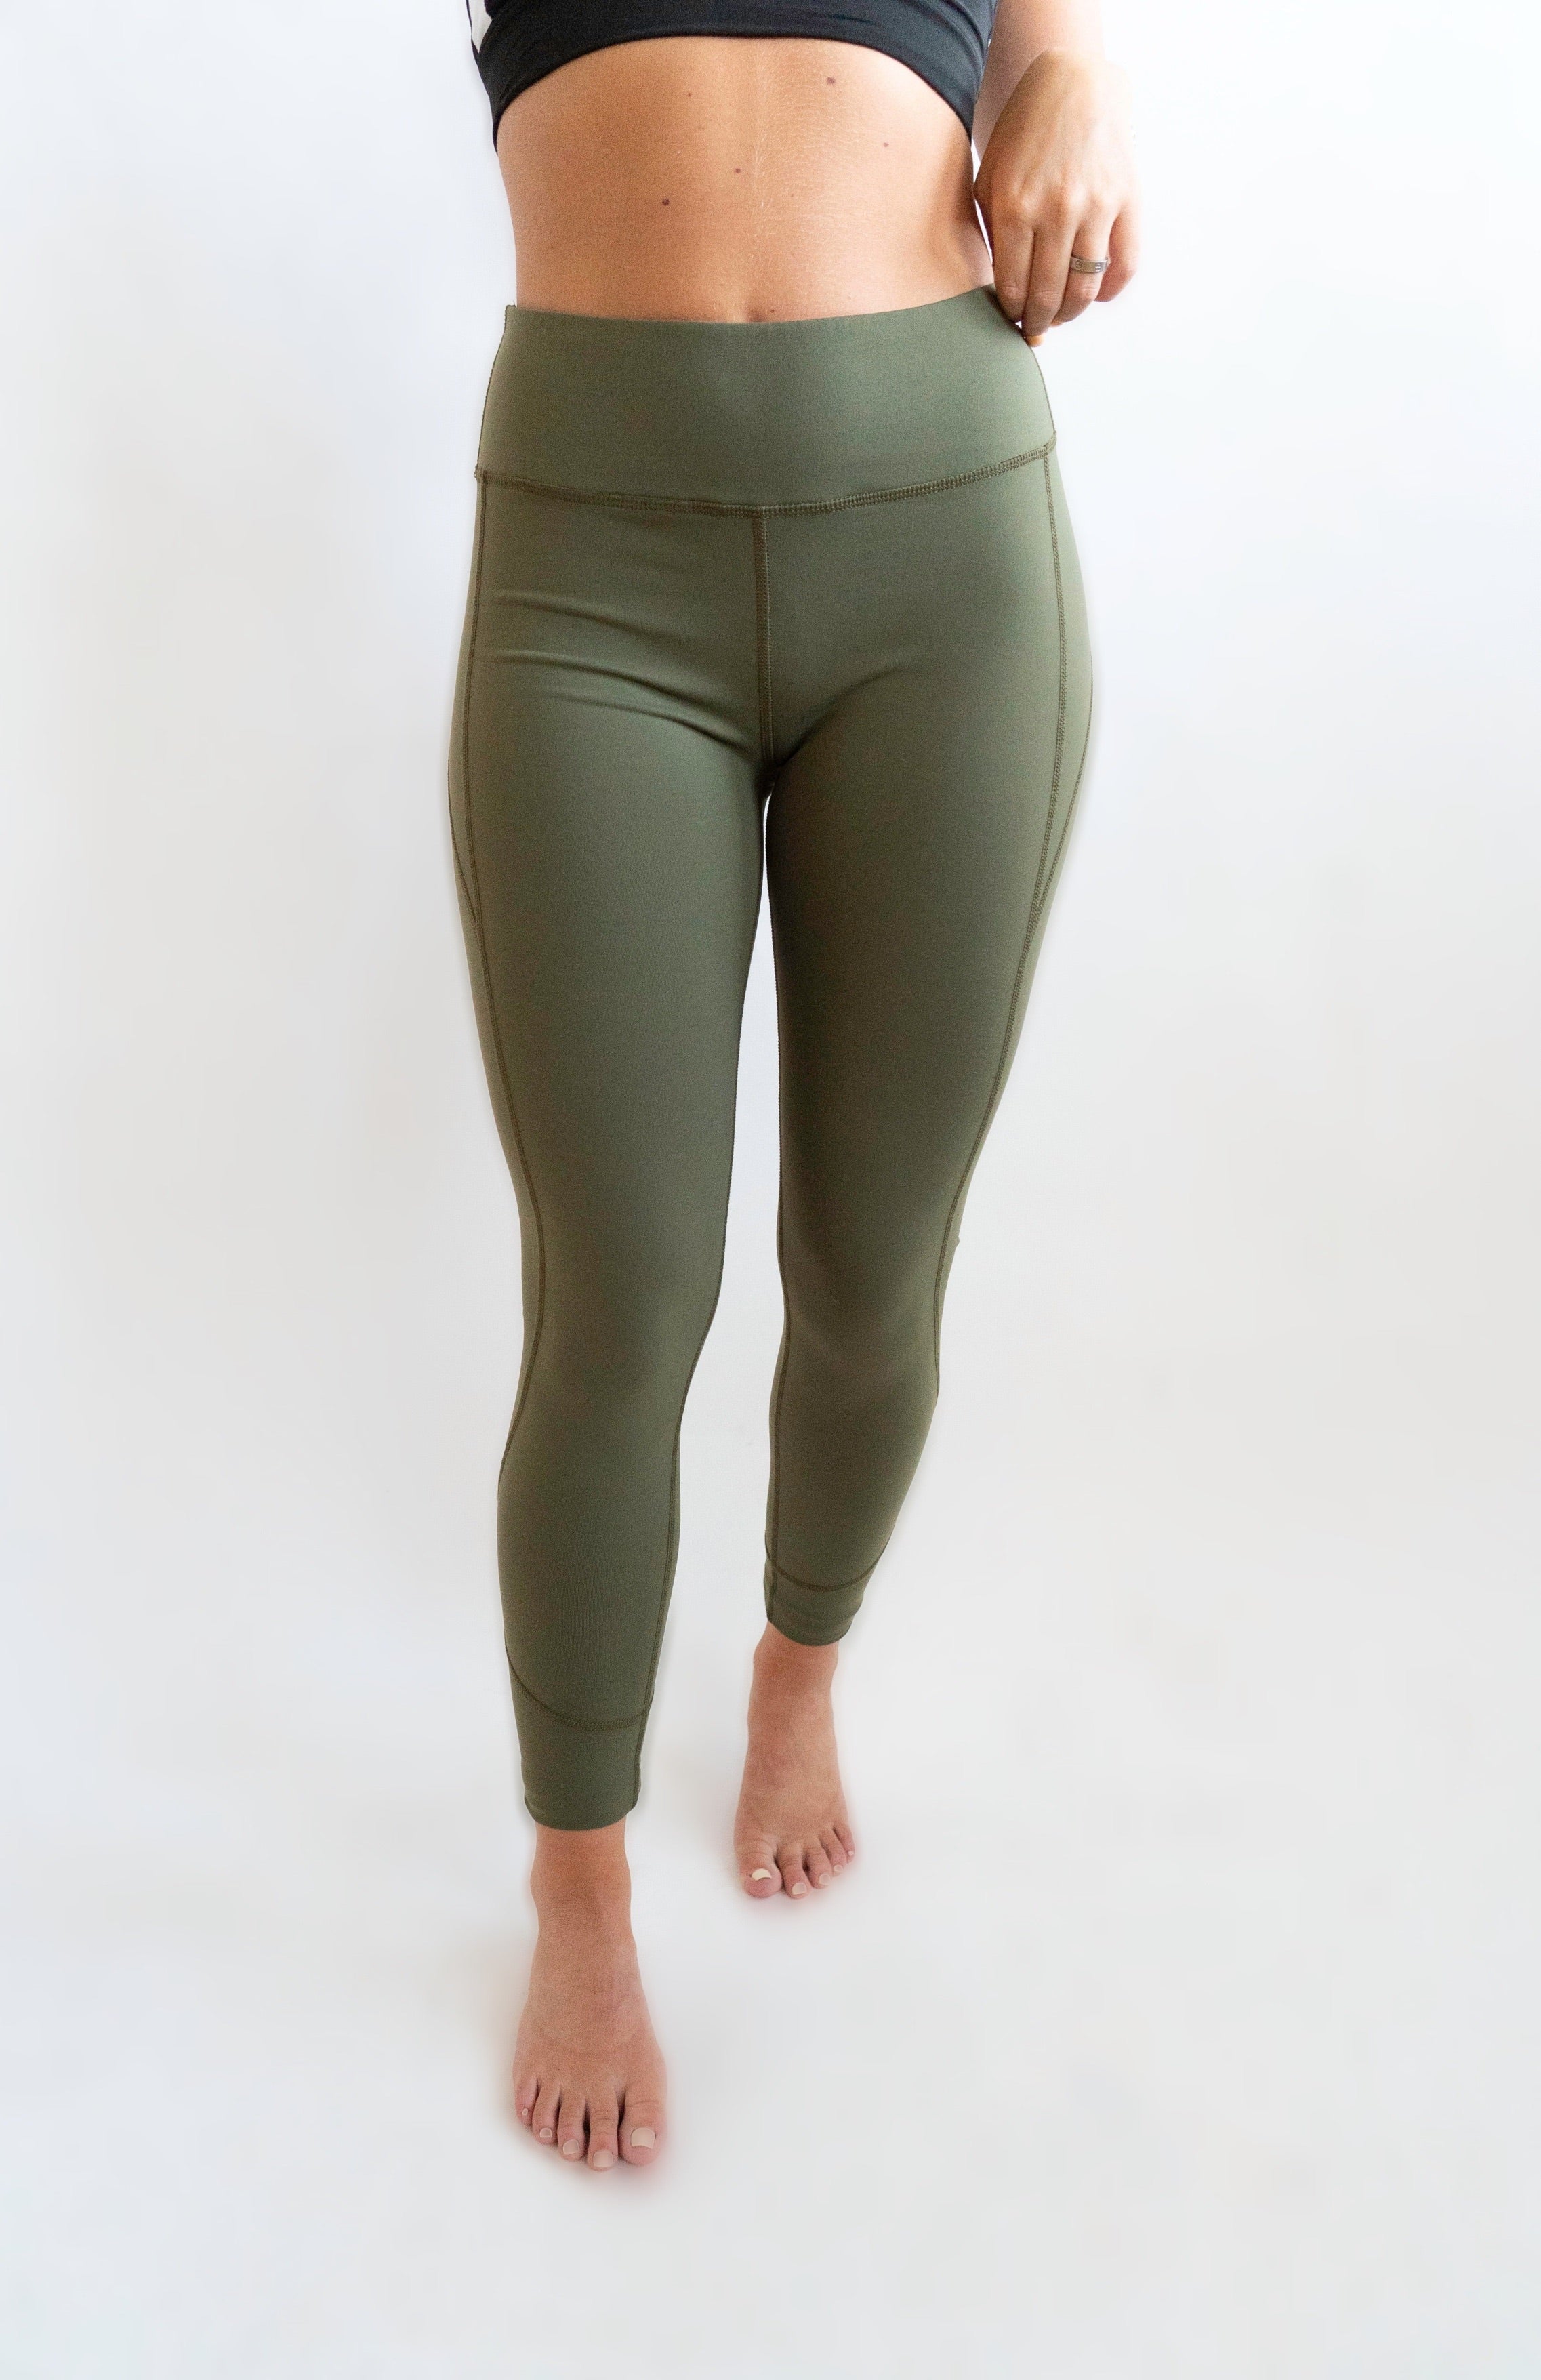 Peach Fit Olive Green